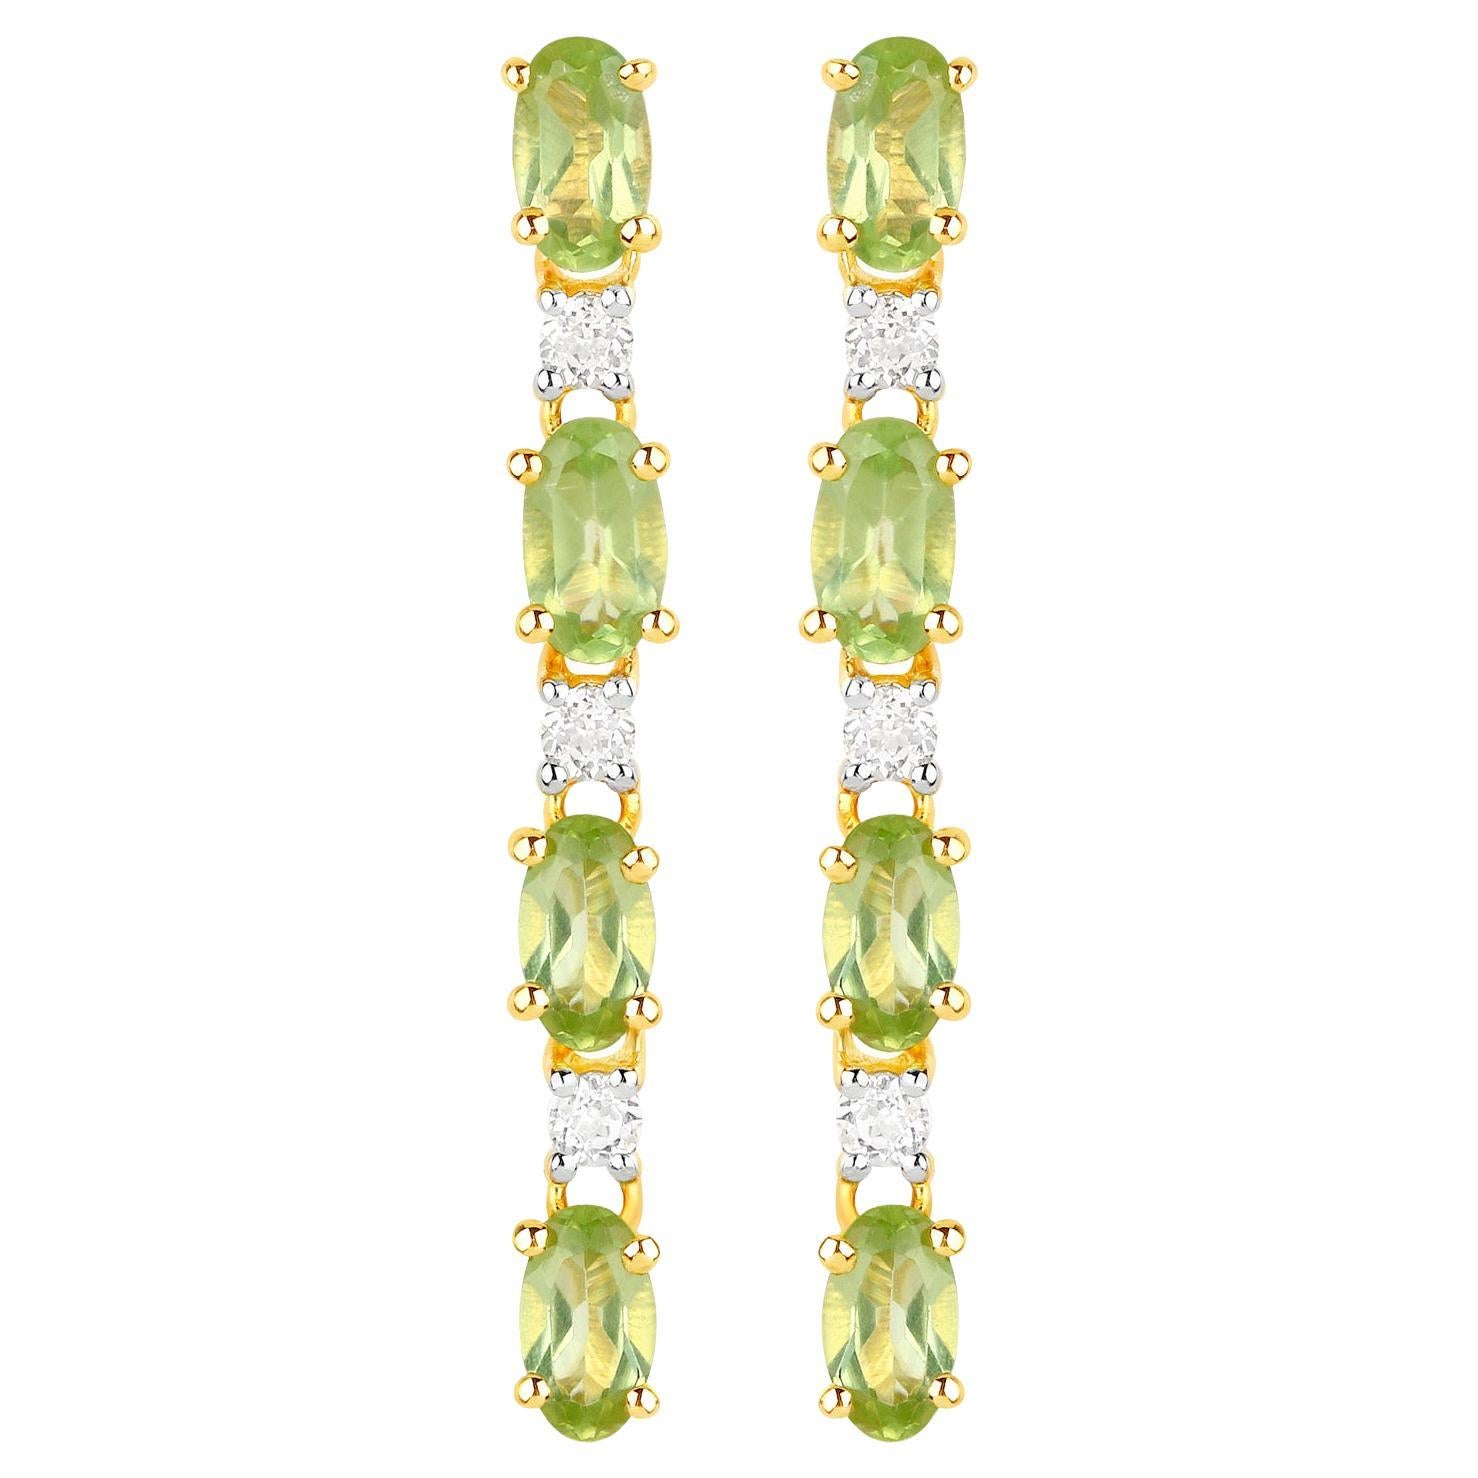 Natural Peridot Dangle Earrings White Topaz 2.1 Carats 18K Gold Plated Silver